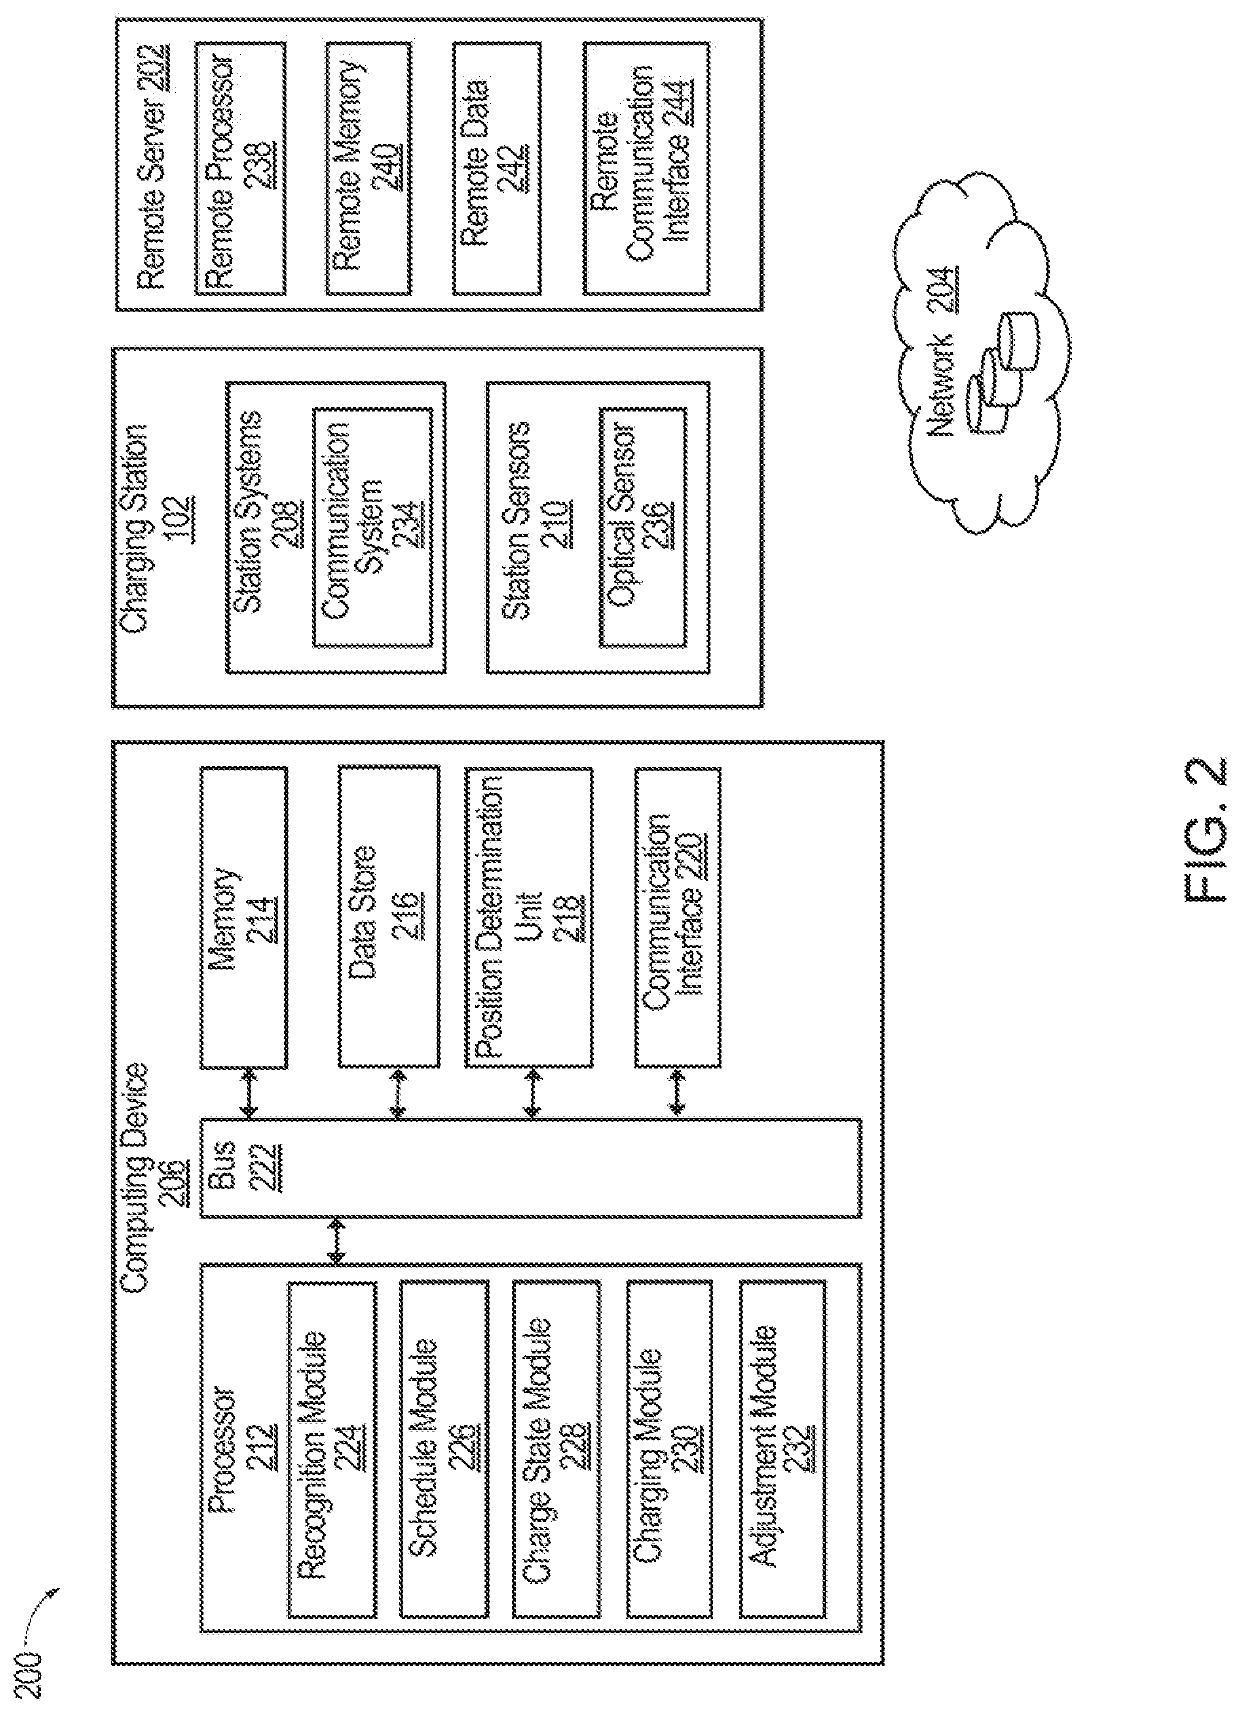 Systems and methods for providing a personalized state of charge